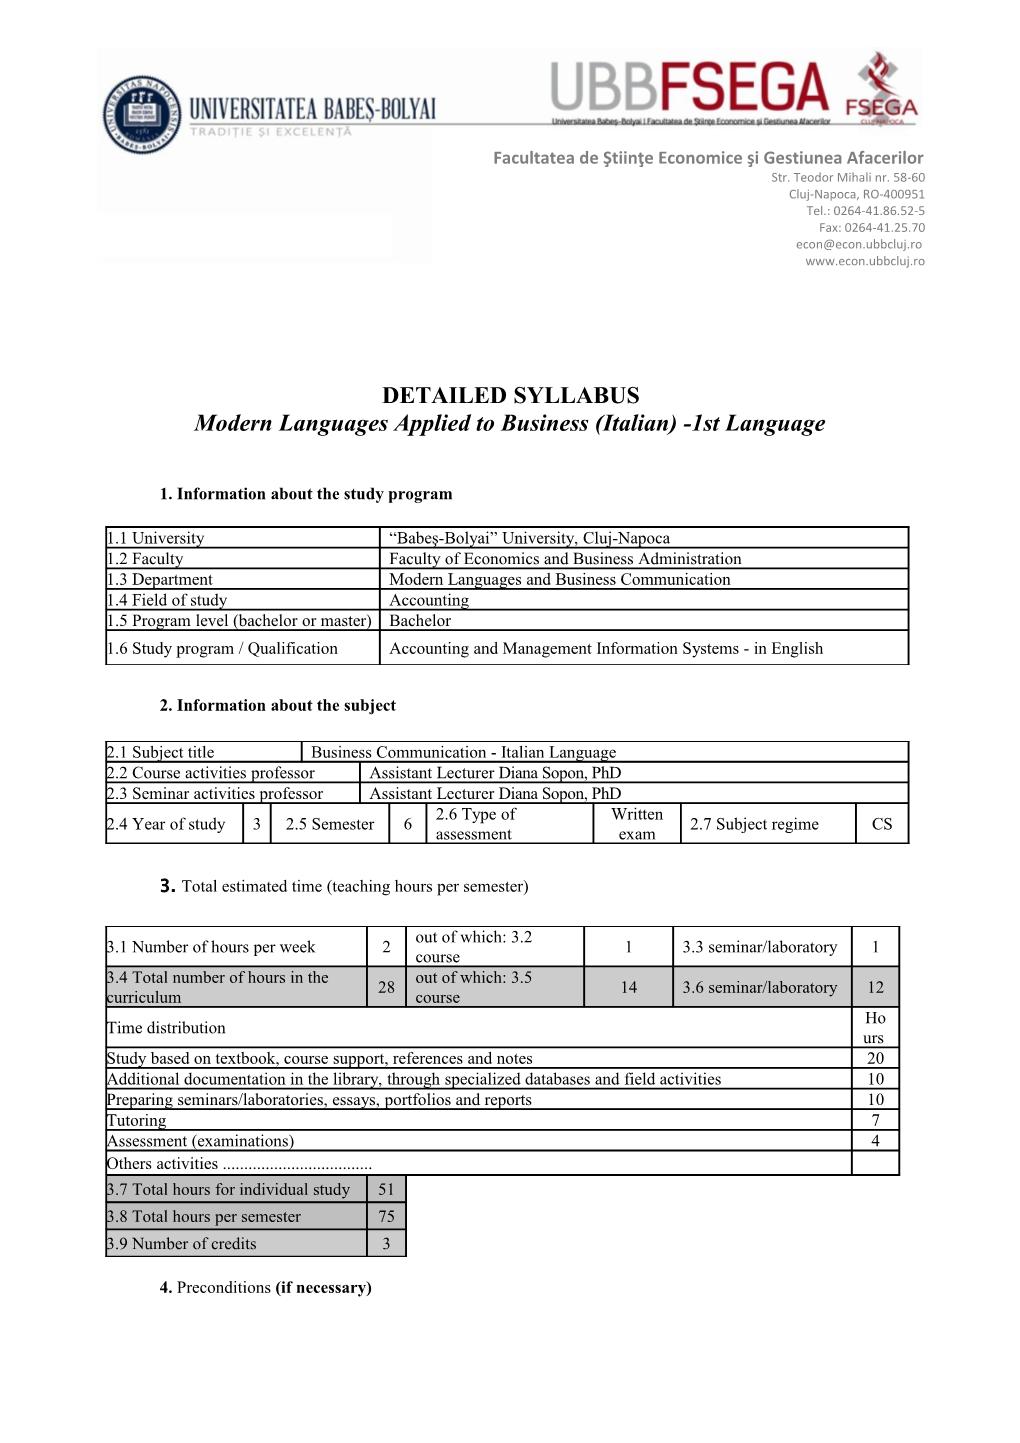 Modern Languages Applied to Business (Italian) -1St Language